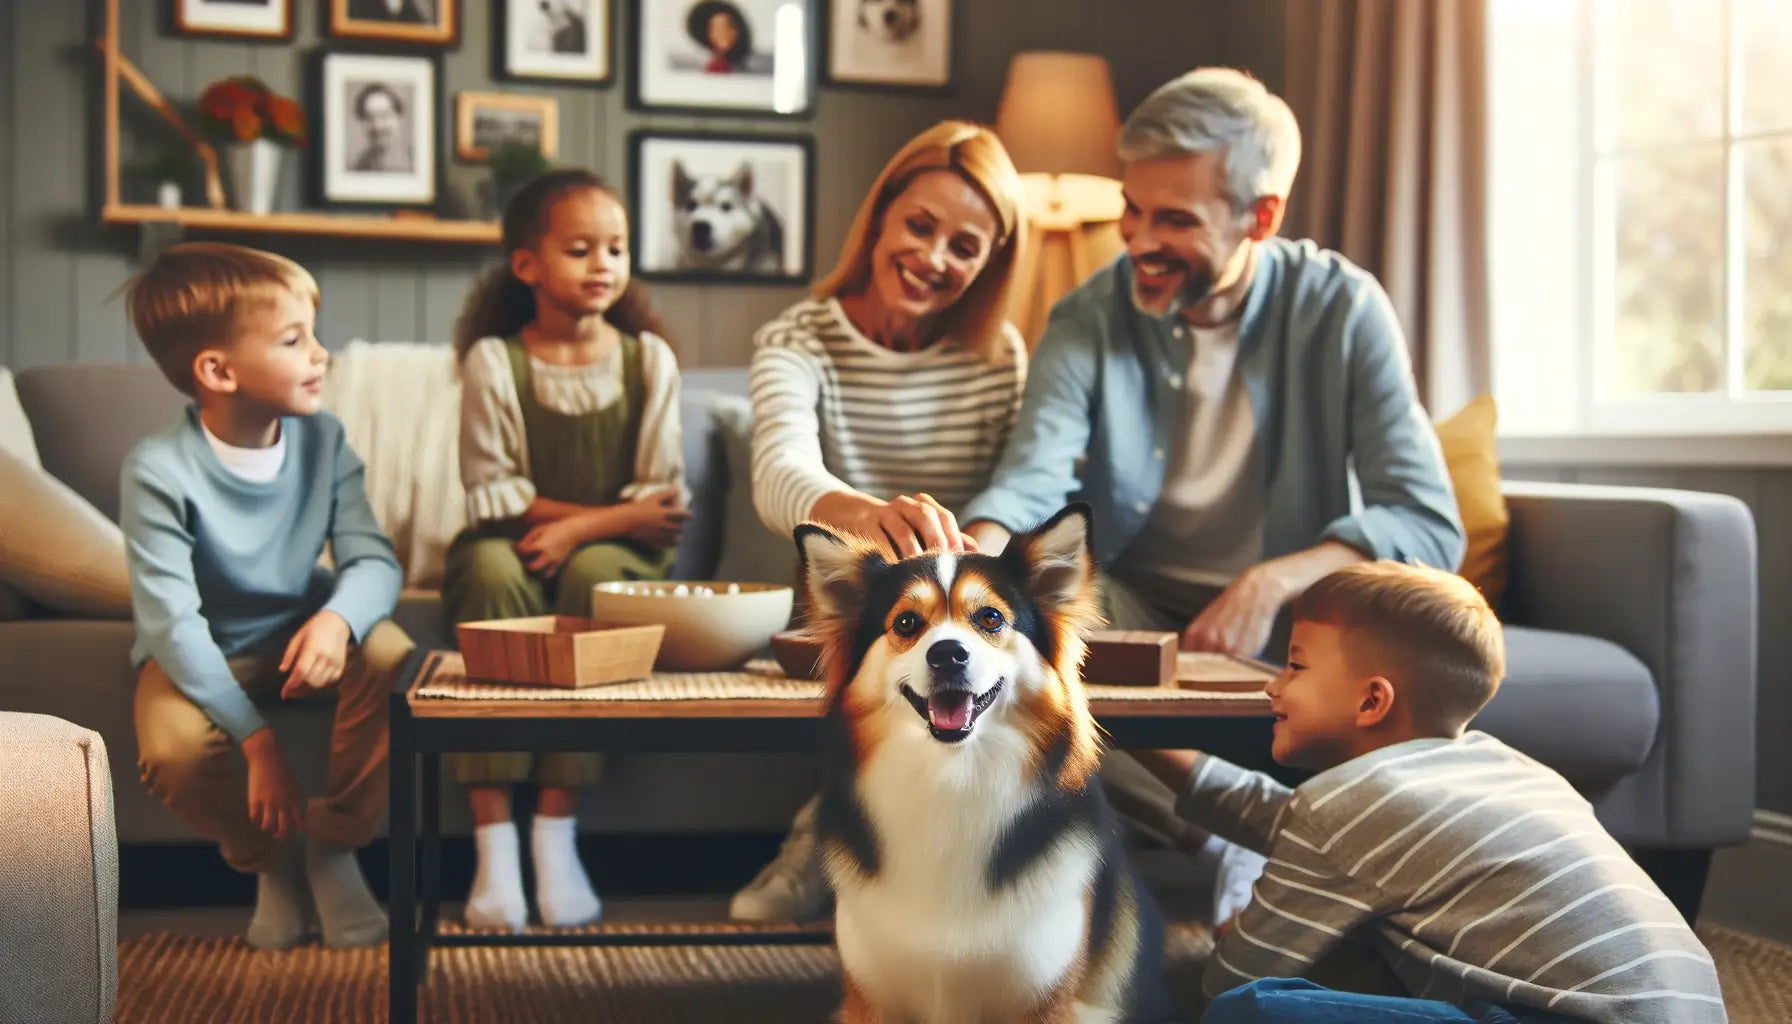 A Chihuahua Husky Mix interacting with both children and adults in a cozy home environment.